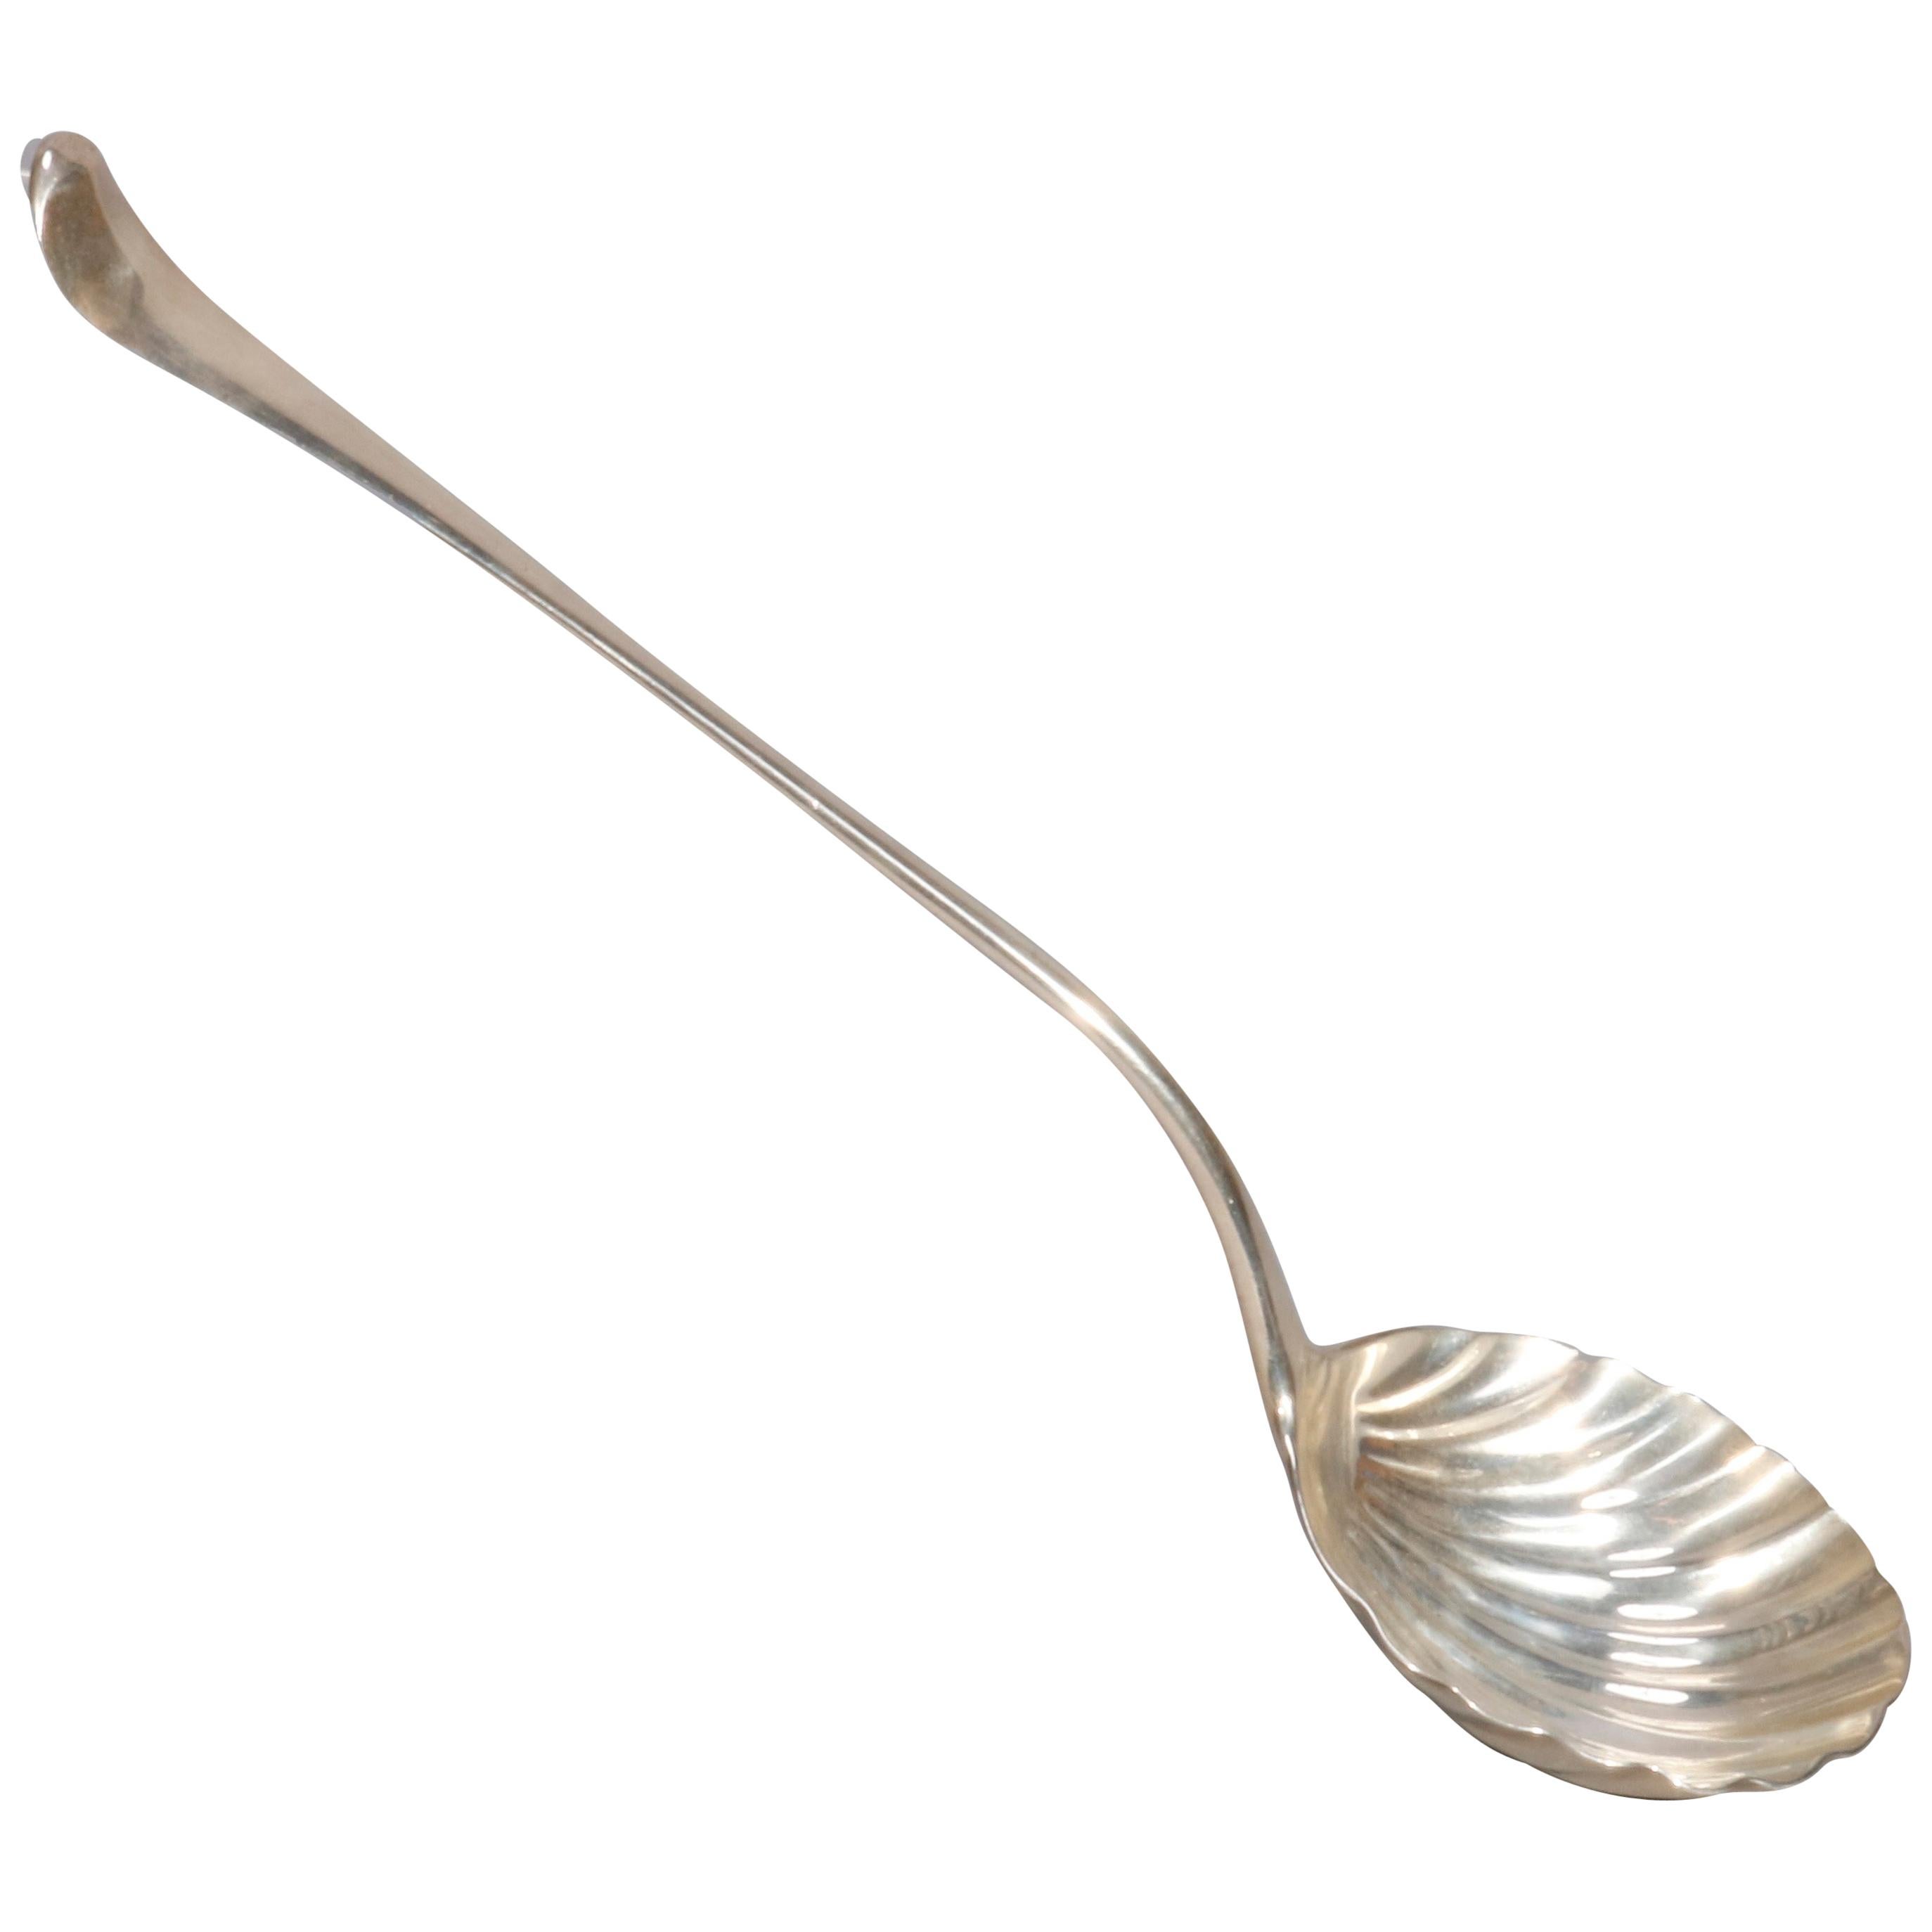 An antique English Georgian ladle offers sterling silver construction with shell form bowl, en verso hallmarks as photographed, 6.7 toz, circa 1850

Measures- 9.25